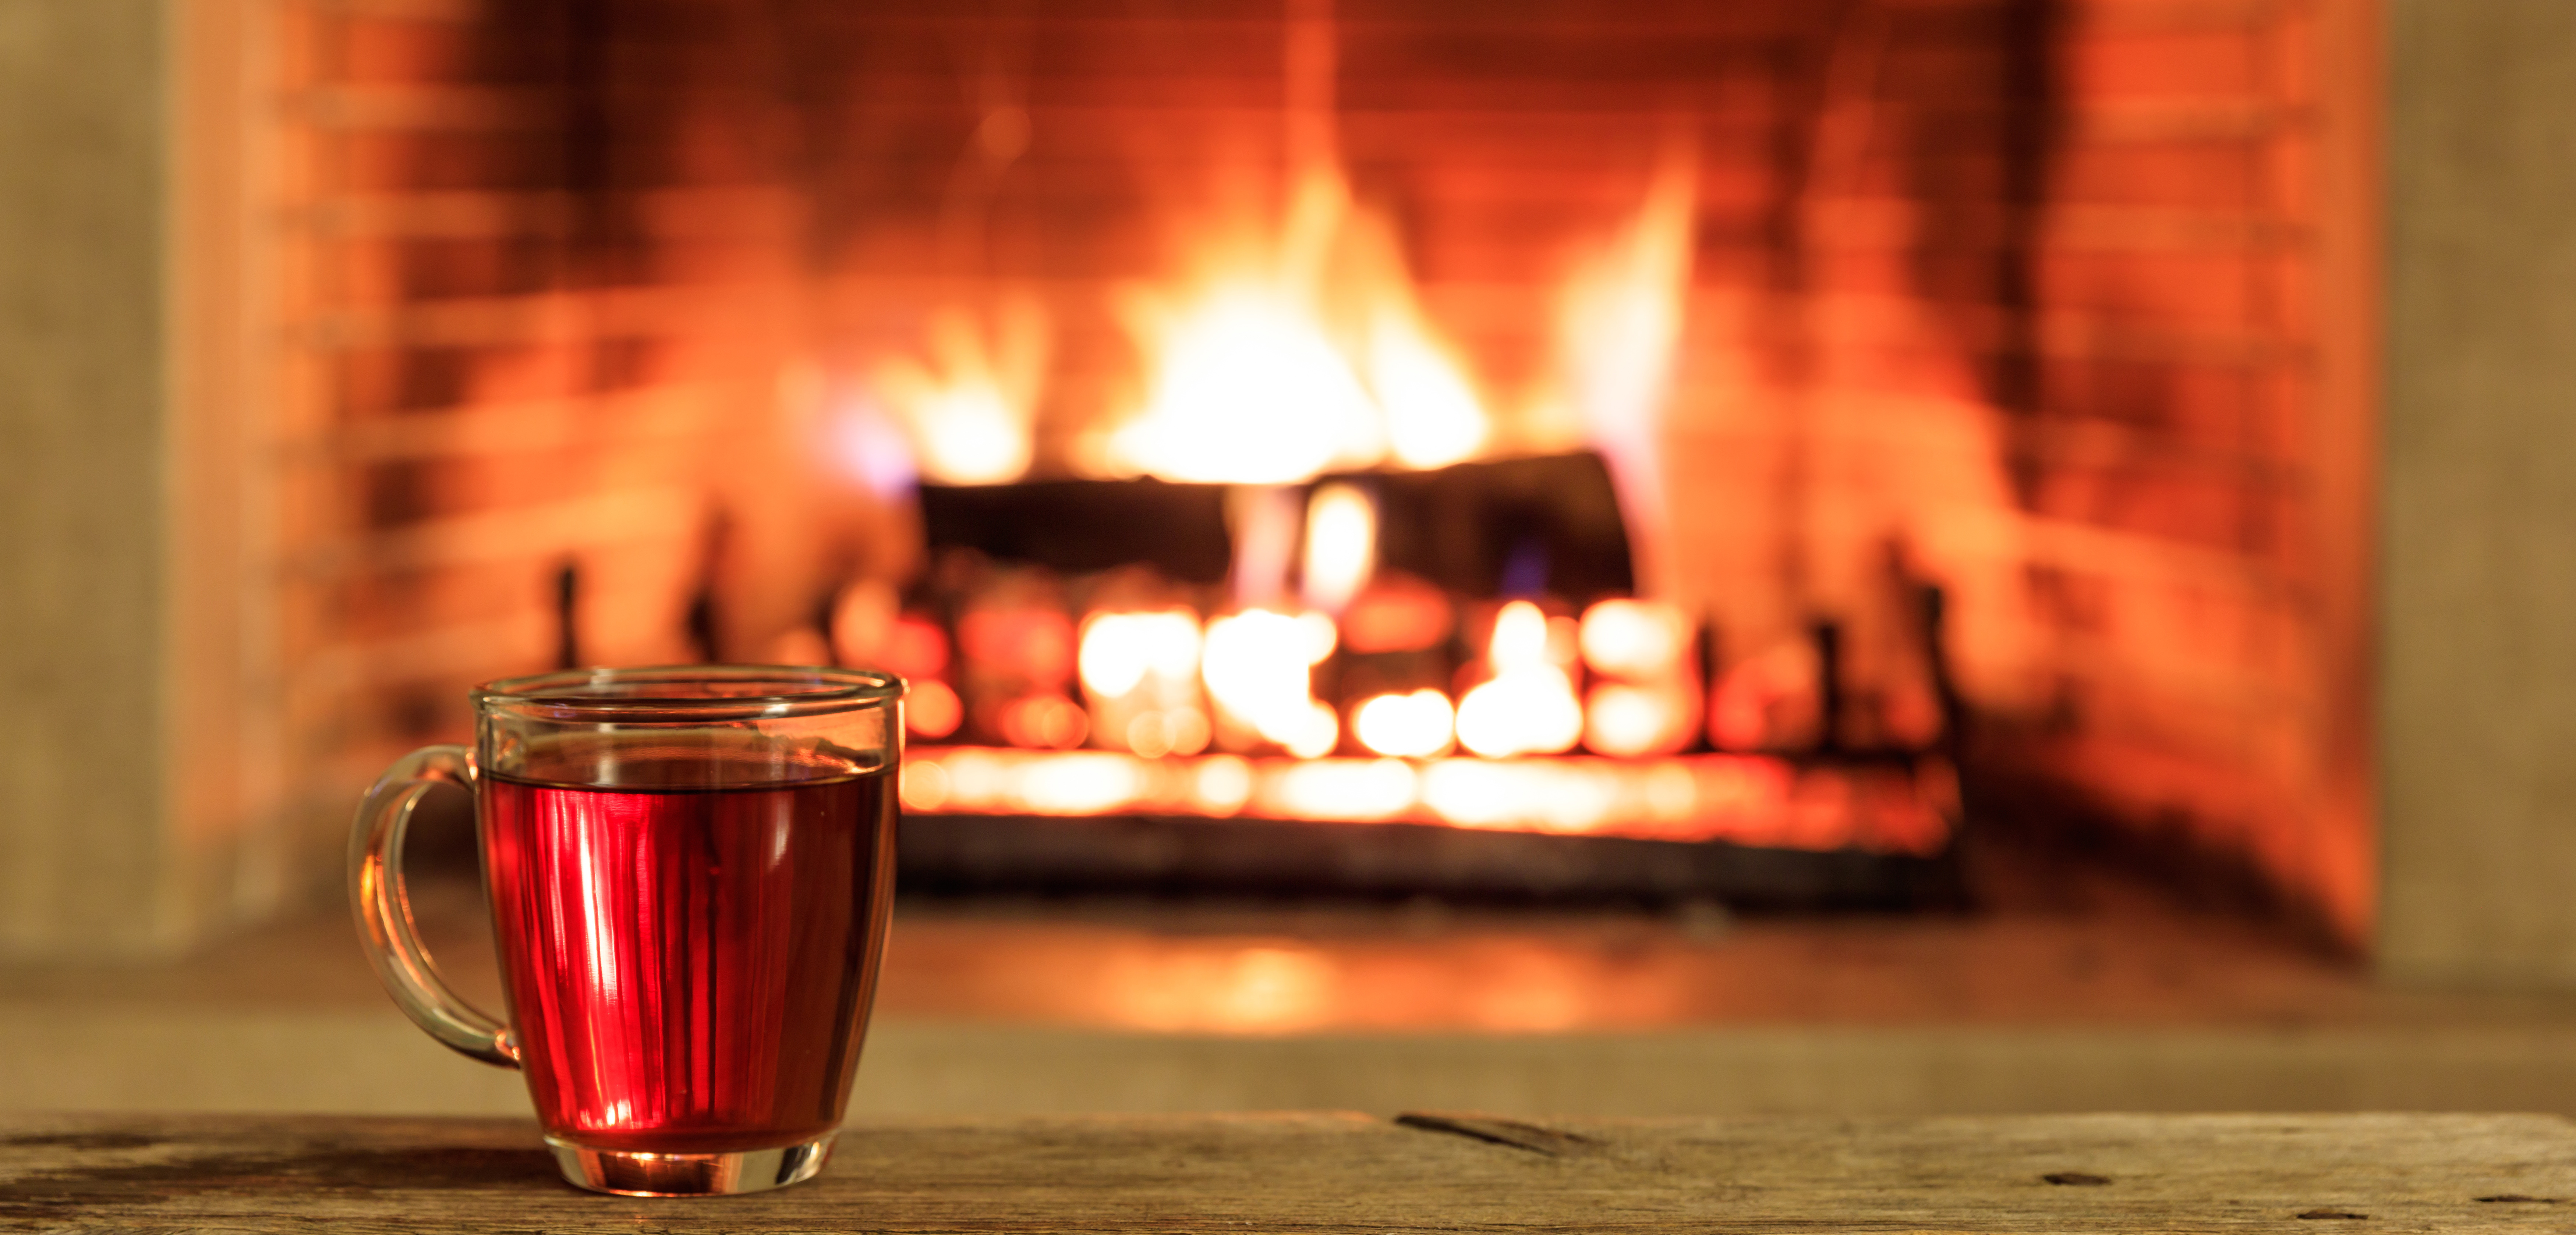 Cup of tea and a burning fireplace background